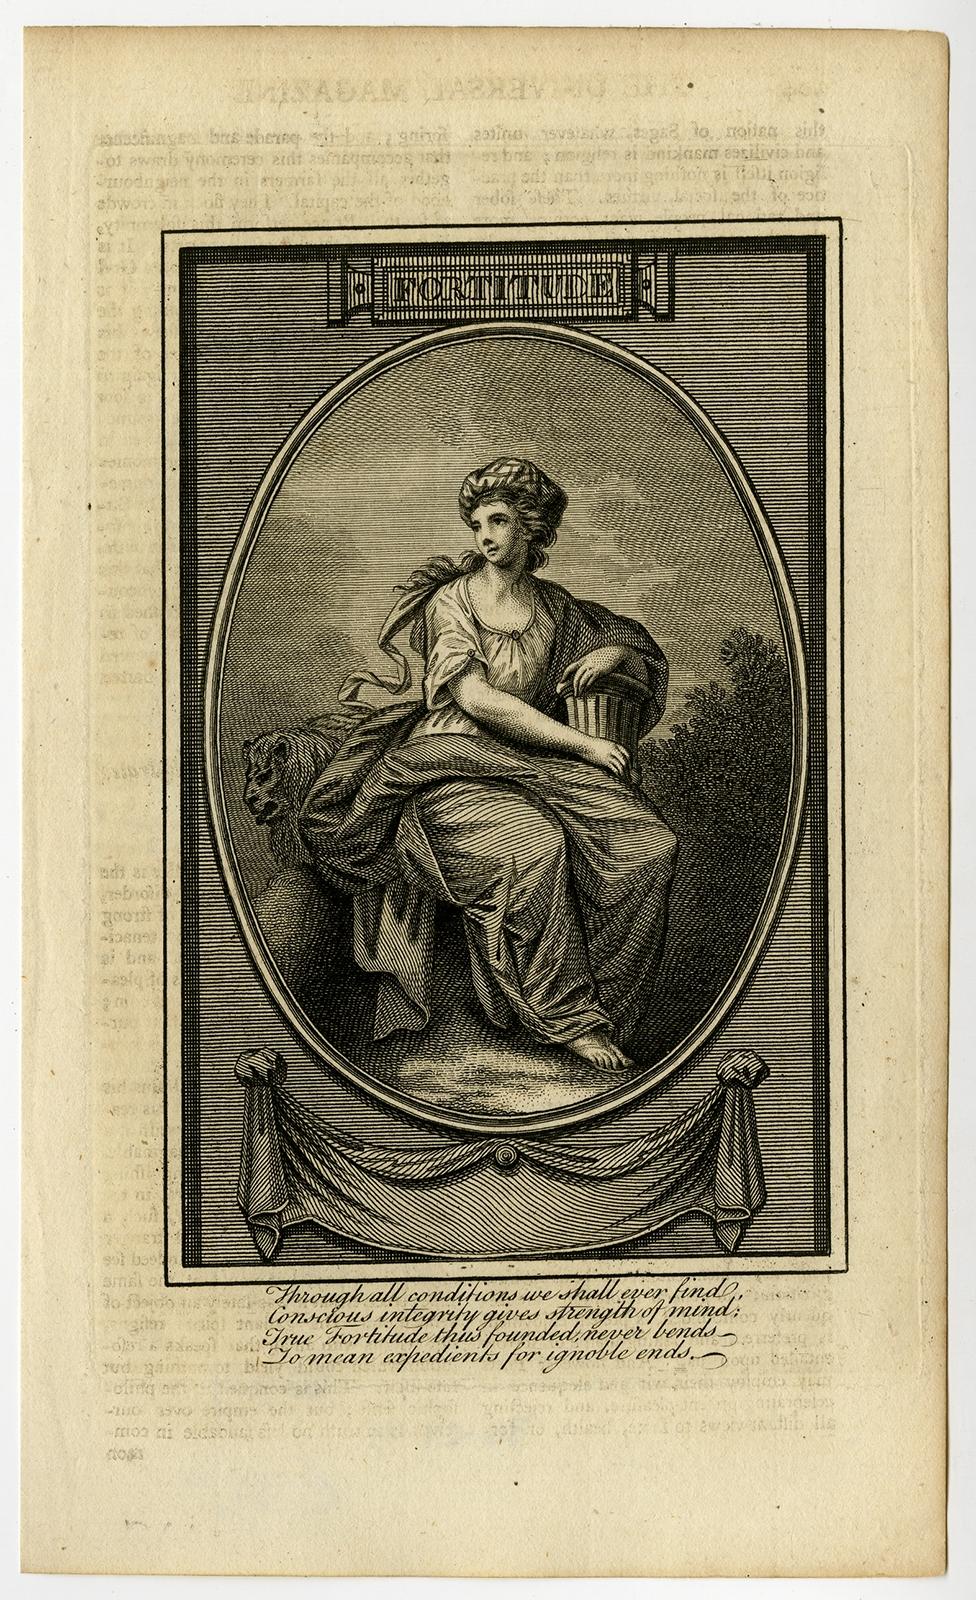 Antique print, titled: 'Fortitude.' - Personification of Fortitude as a modestly dressed seated female figure. A lion in the background. From 'The Universal Magazine of Knowledge and Pleasure'. This periodical was published between 1747 and 1814,